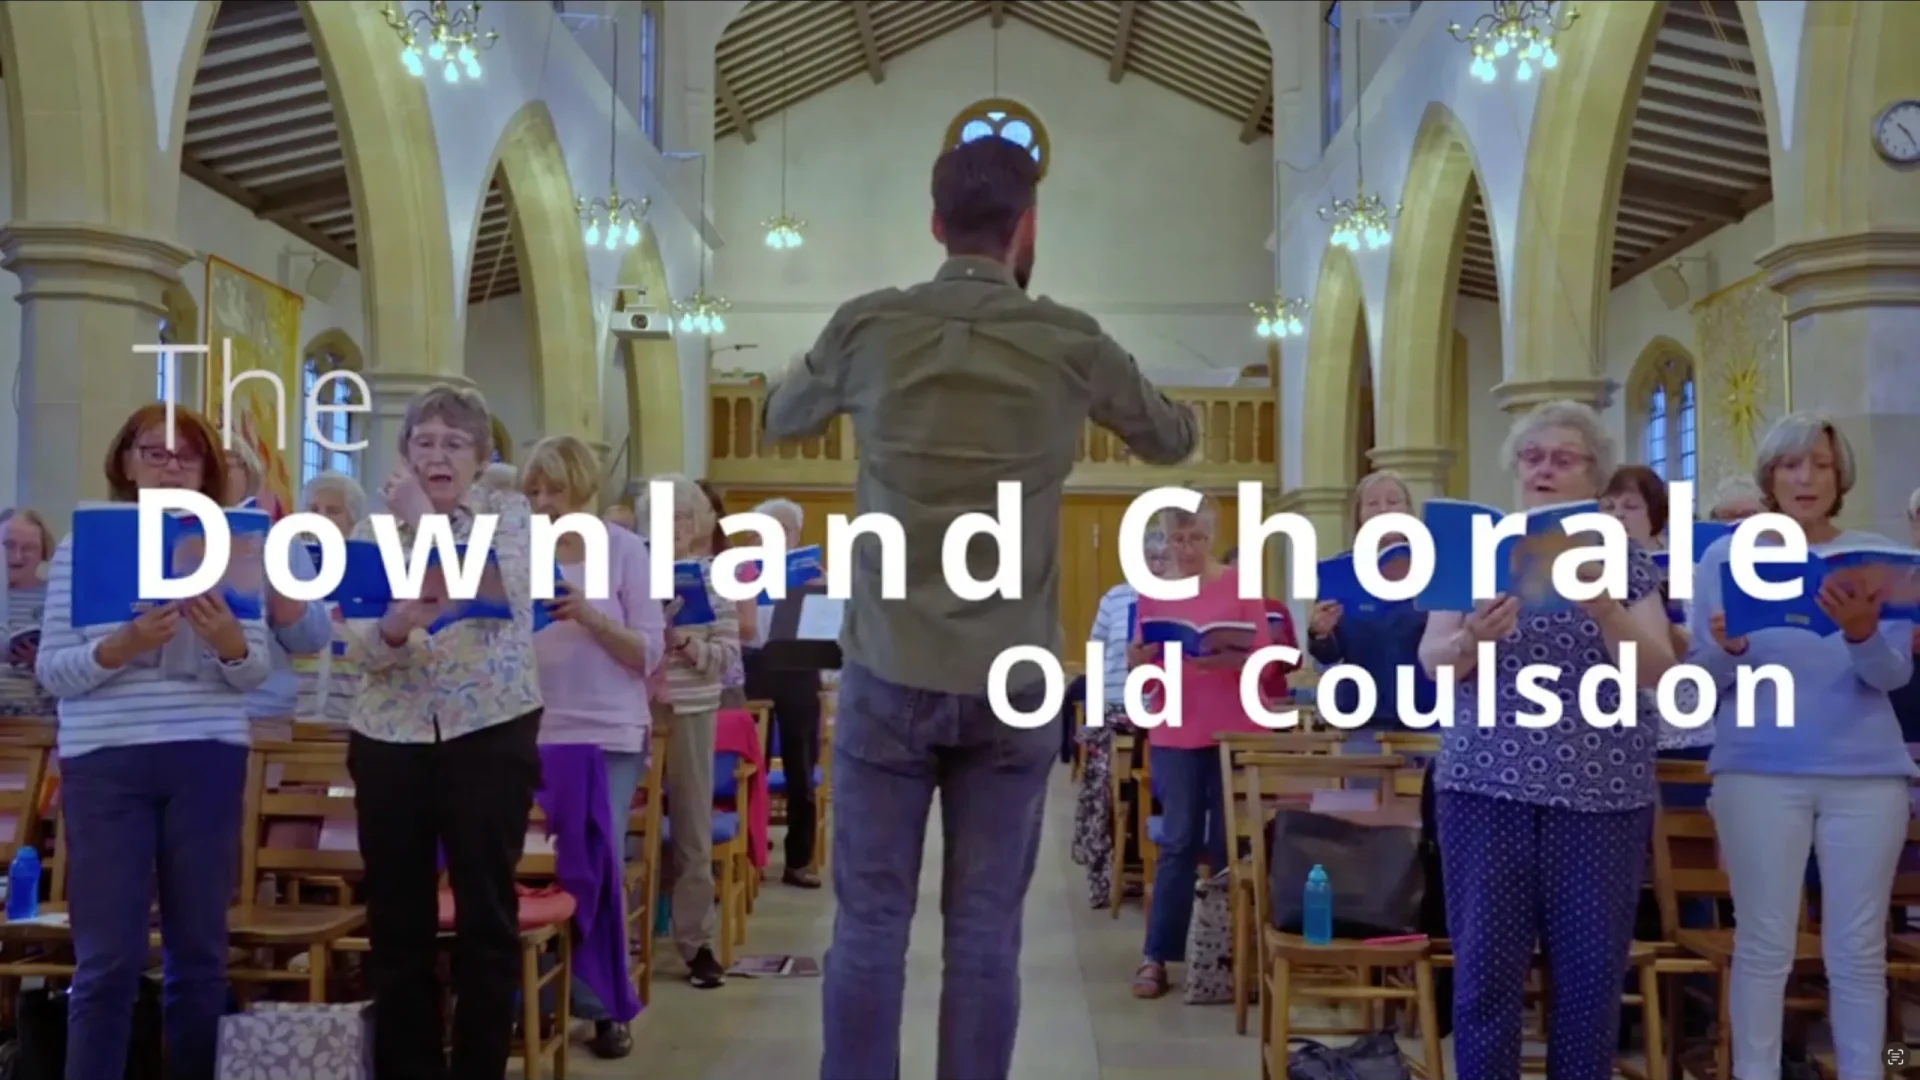 Downland Chorale Choir singing in a church during a promotional event.